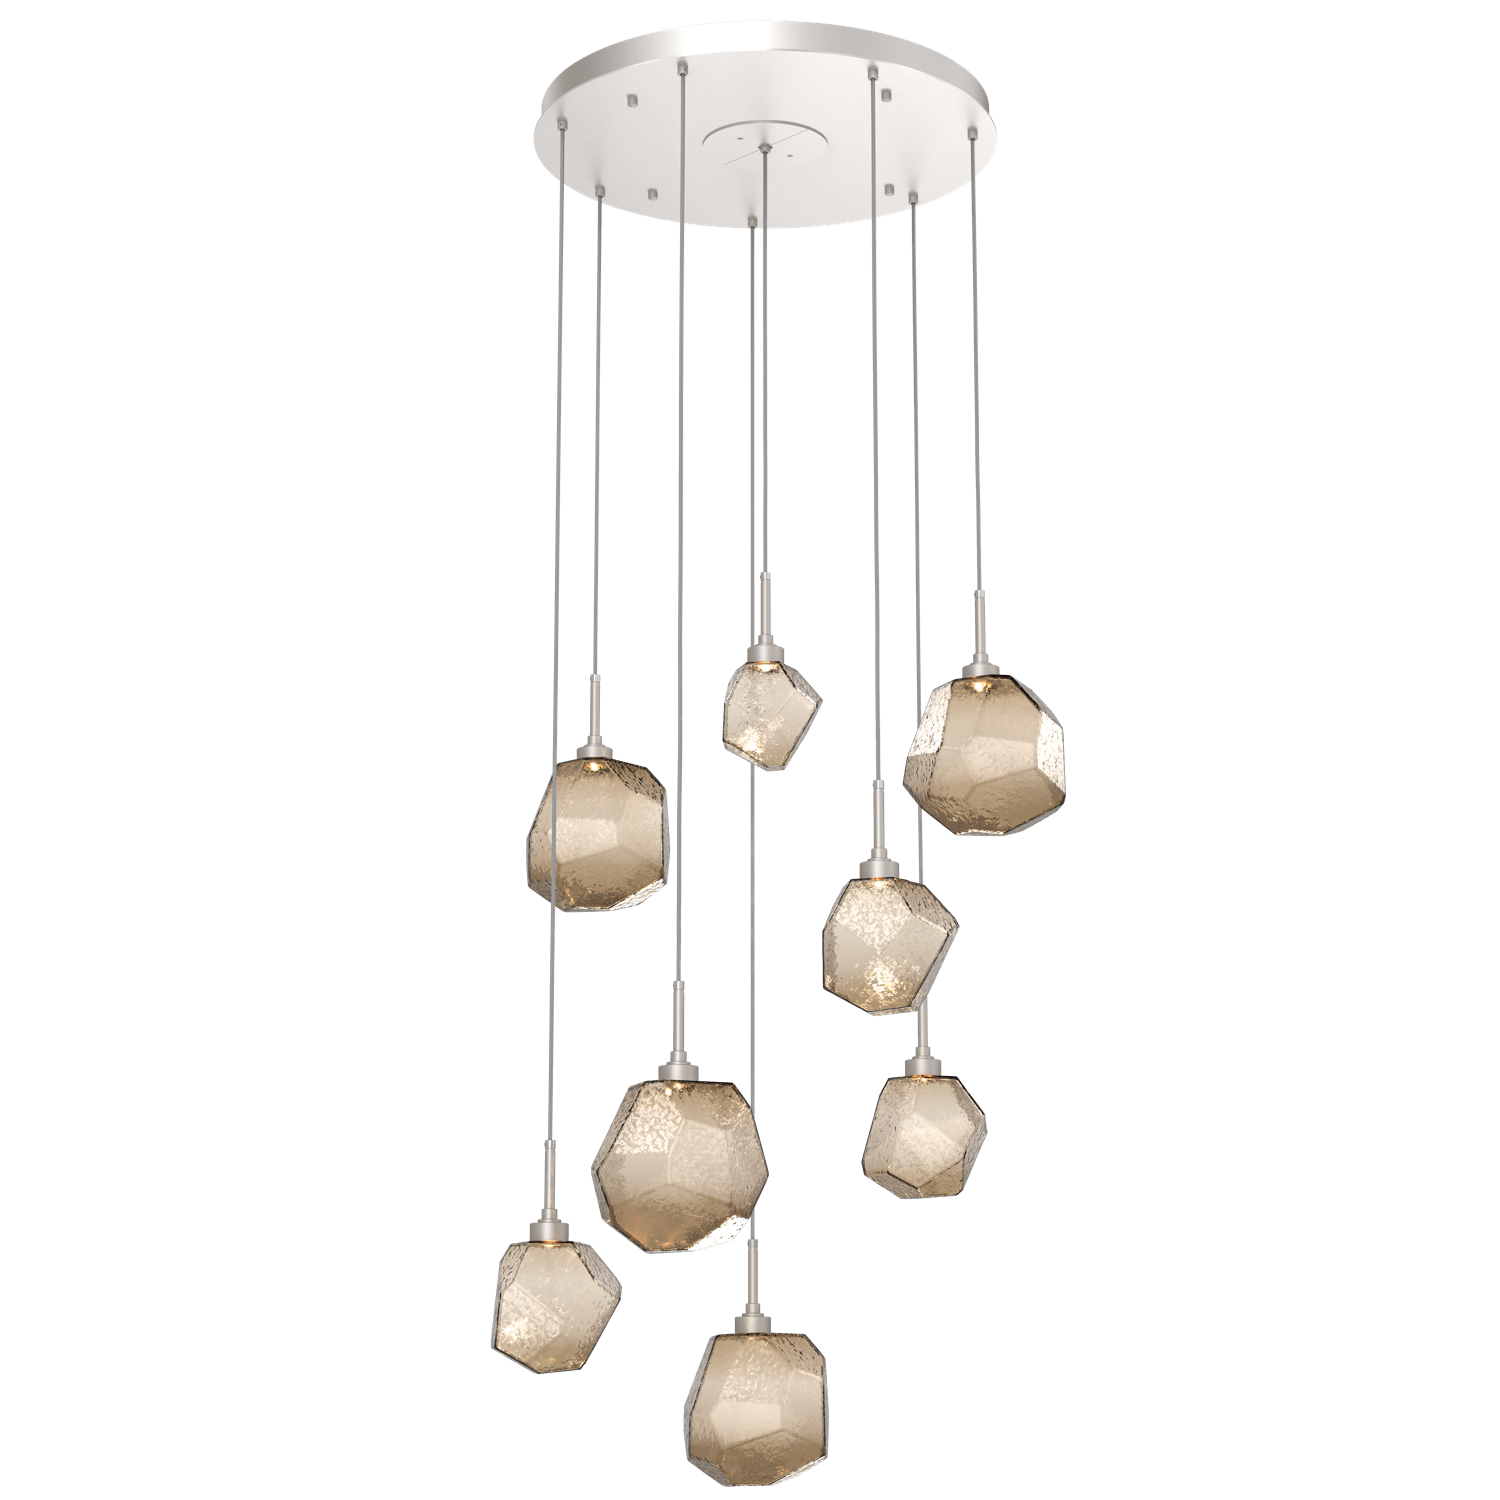 CHB0039-08-BS-B-Hammerton-Studio-Gem-8-light-round-pendant-chandelier-with-metallic-beige-silver-finish-and-bronze-blown-glass-shades-and-LED-lamping